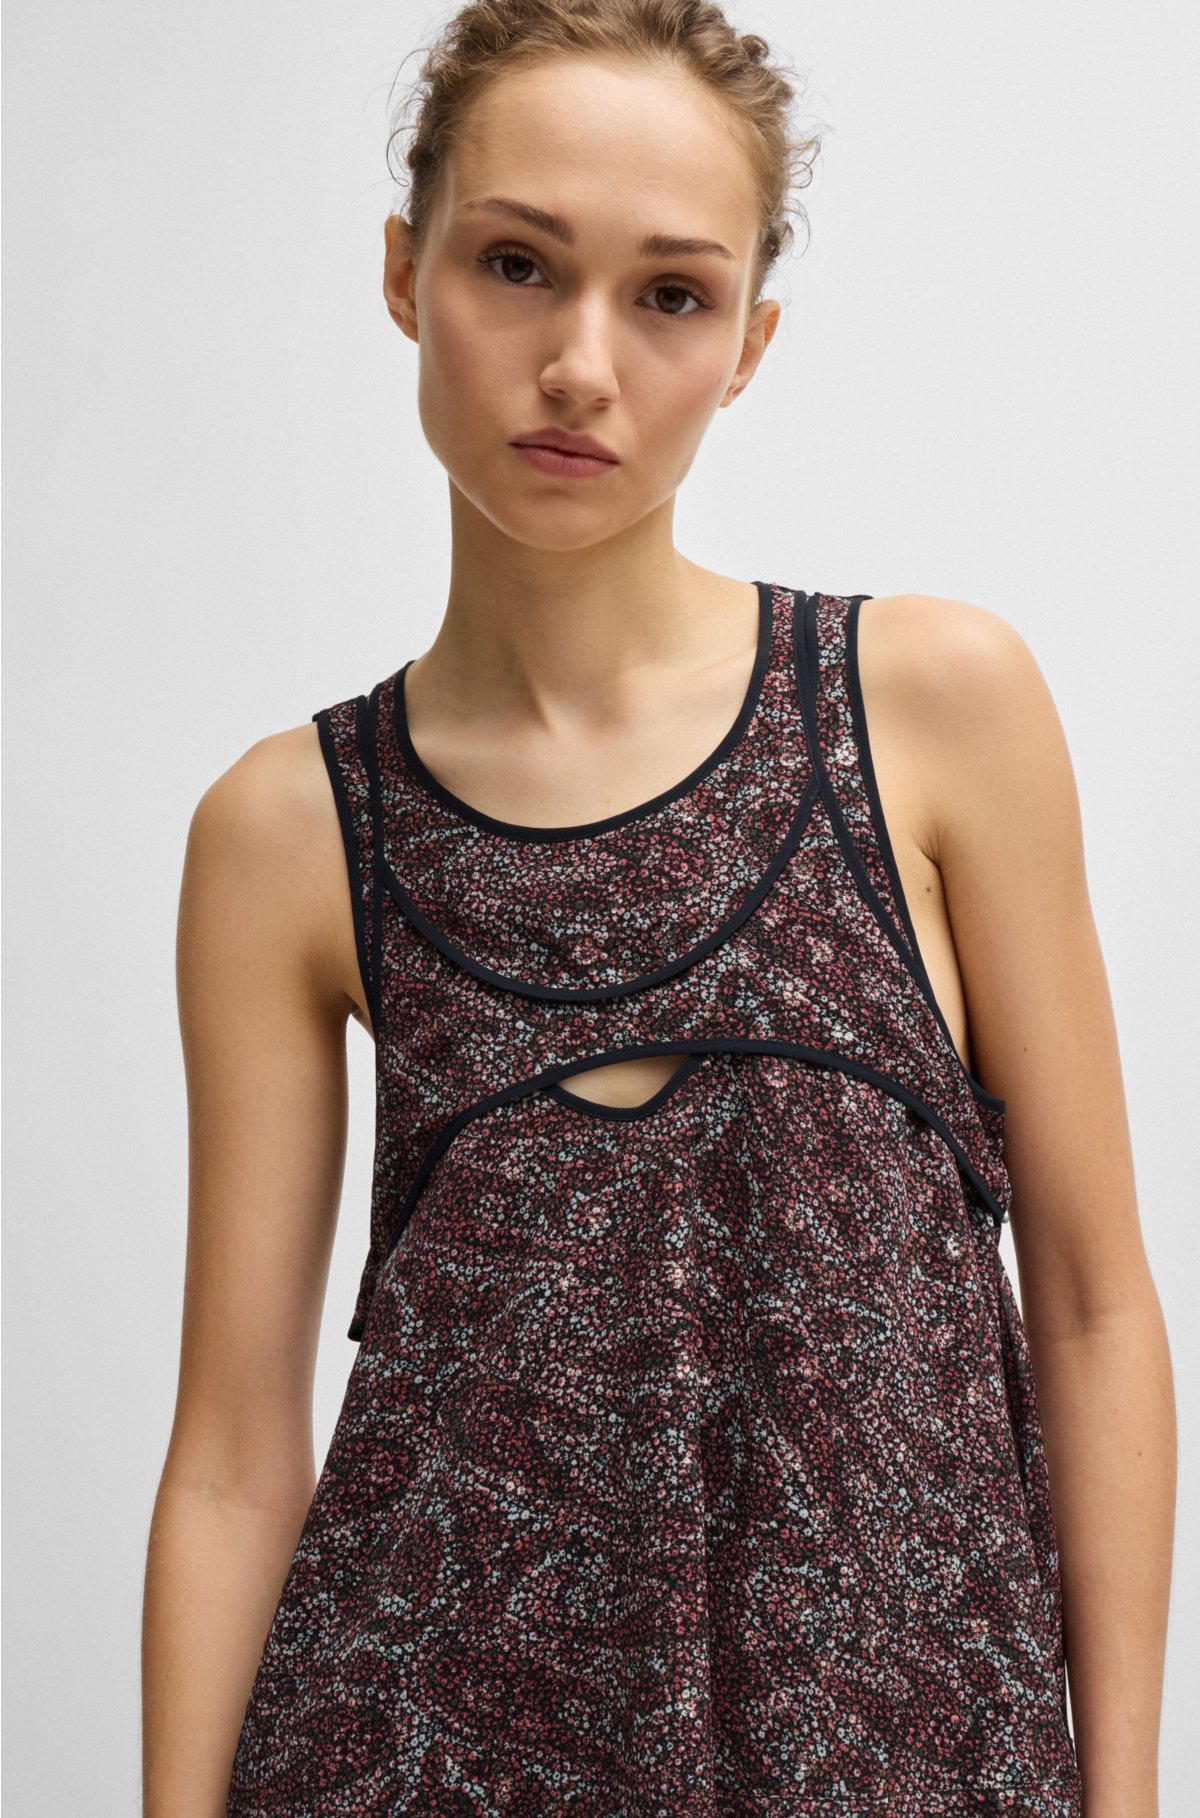 Regular-fit sleeveless blouse with overlapping detail, Patterned